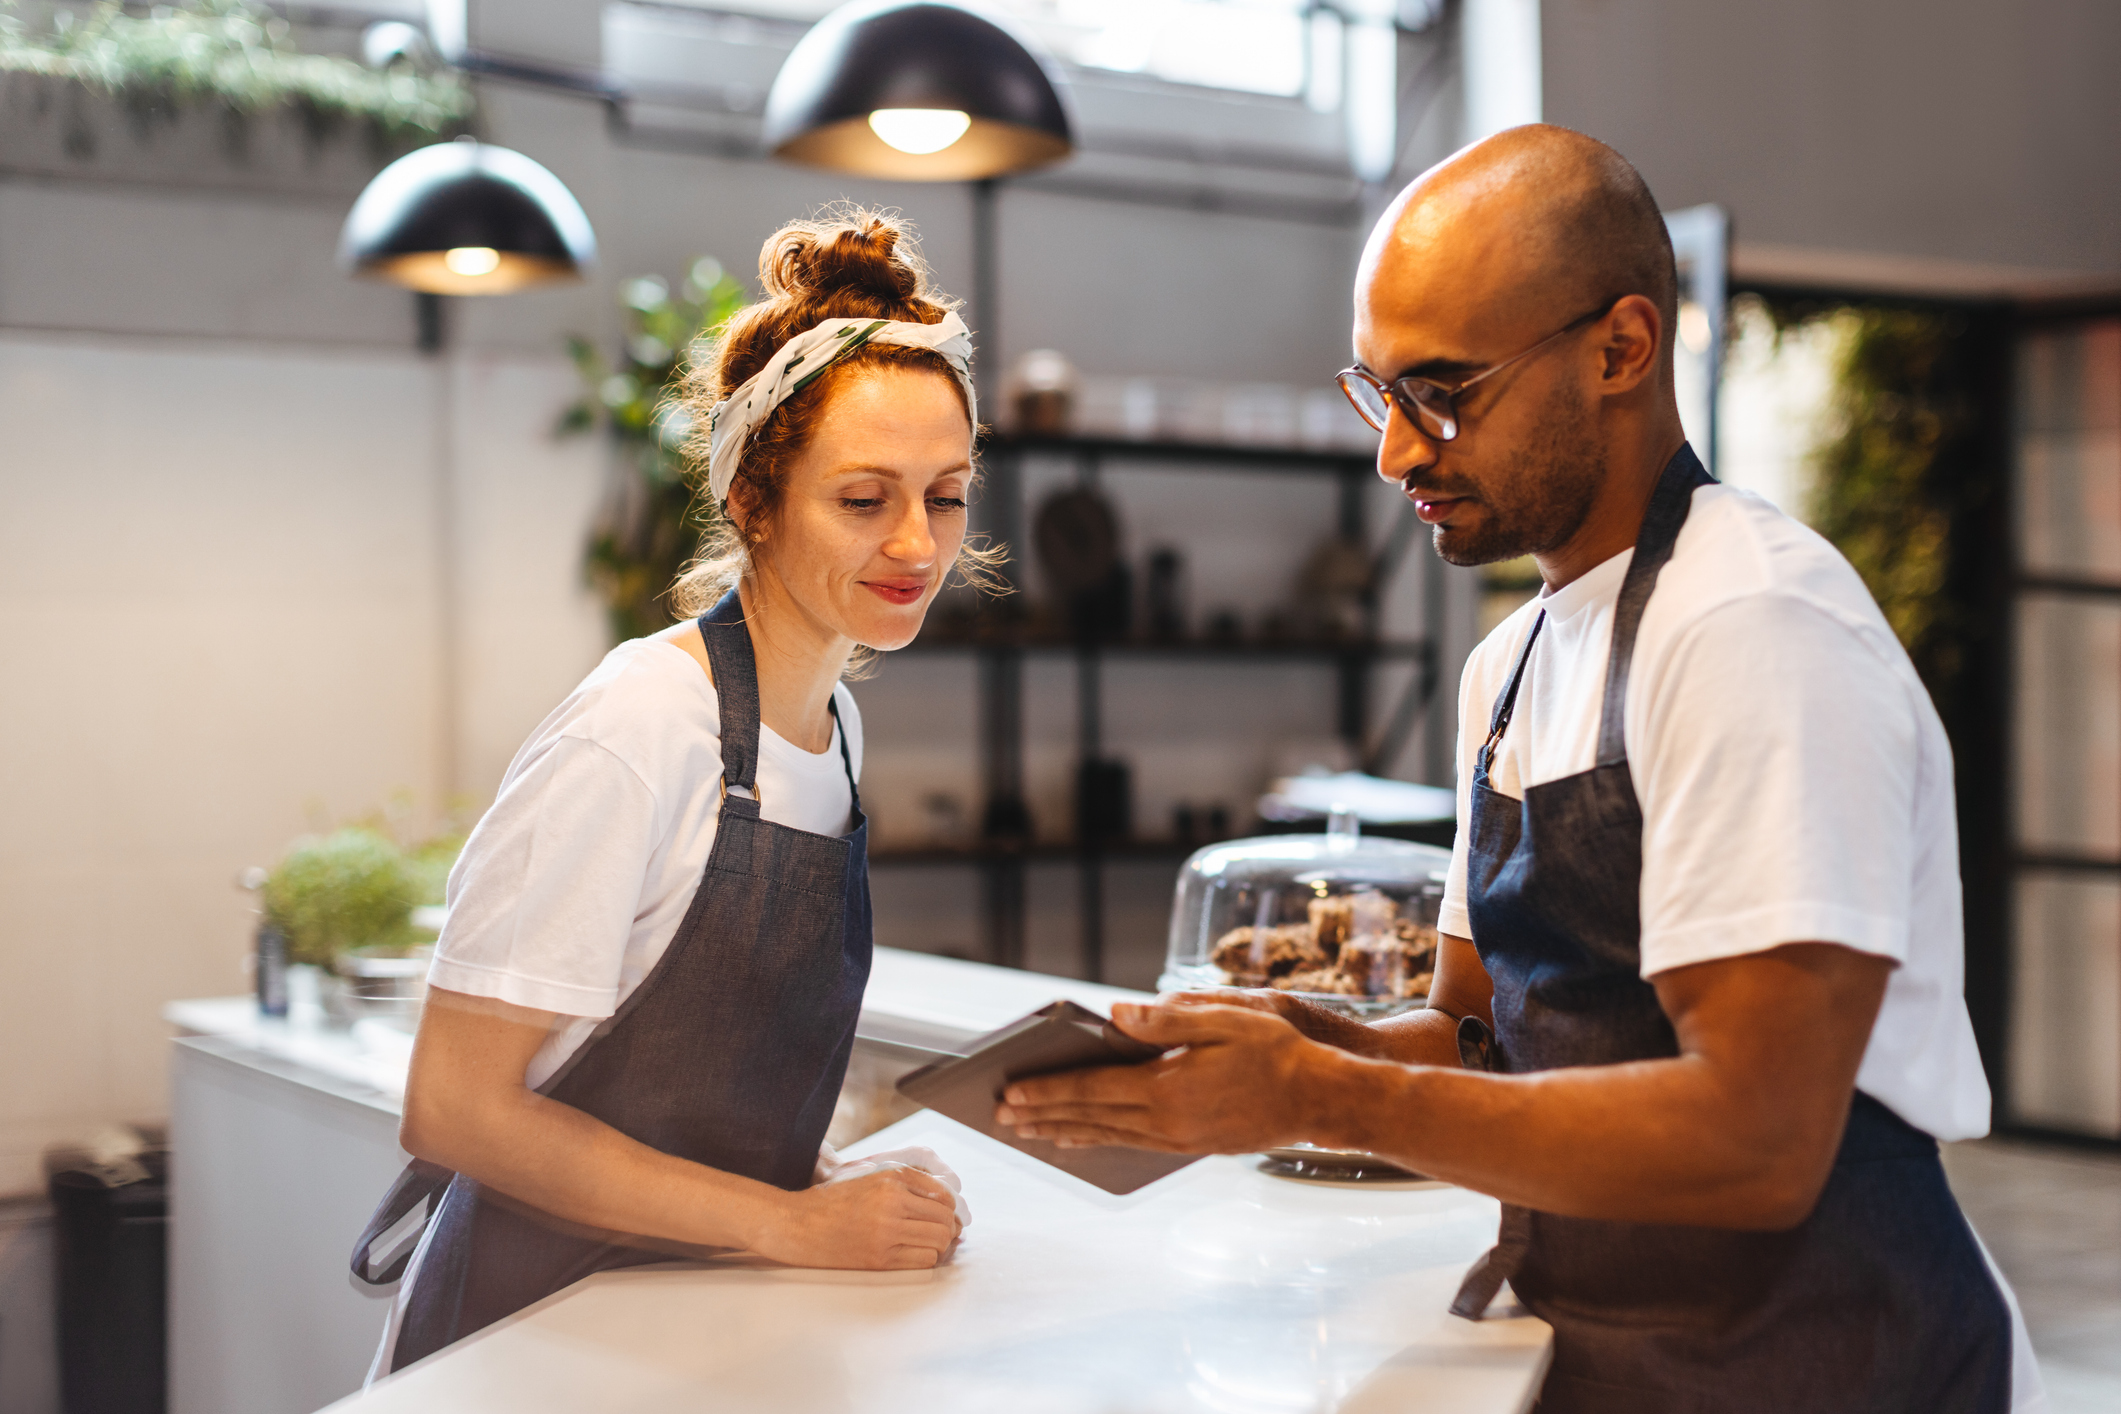 gen z restaurant workers looking at a mobile device